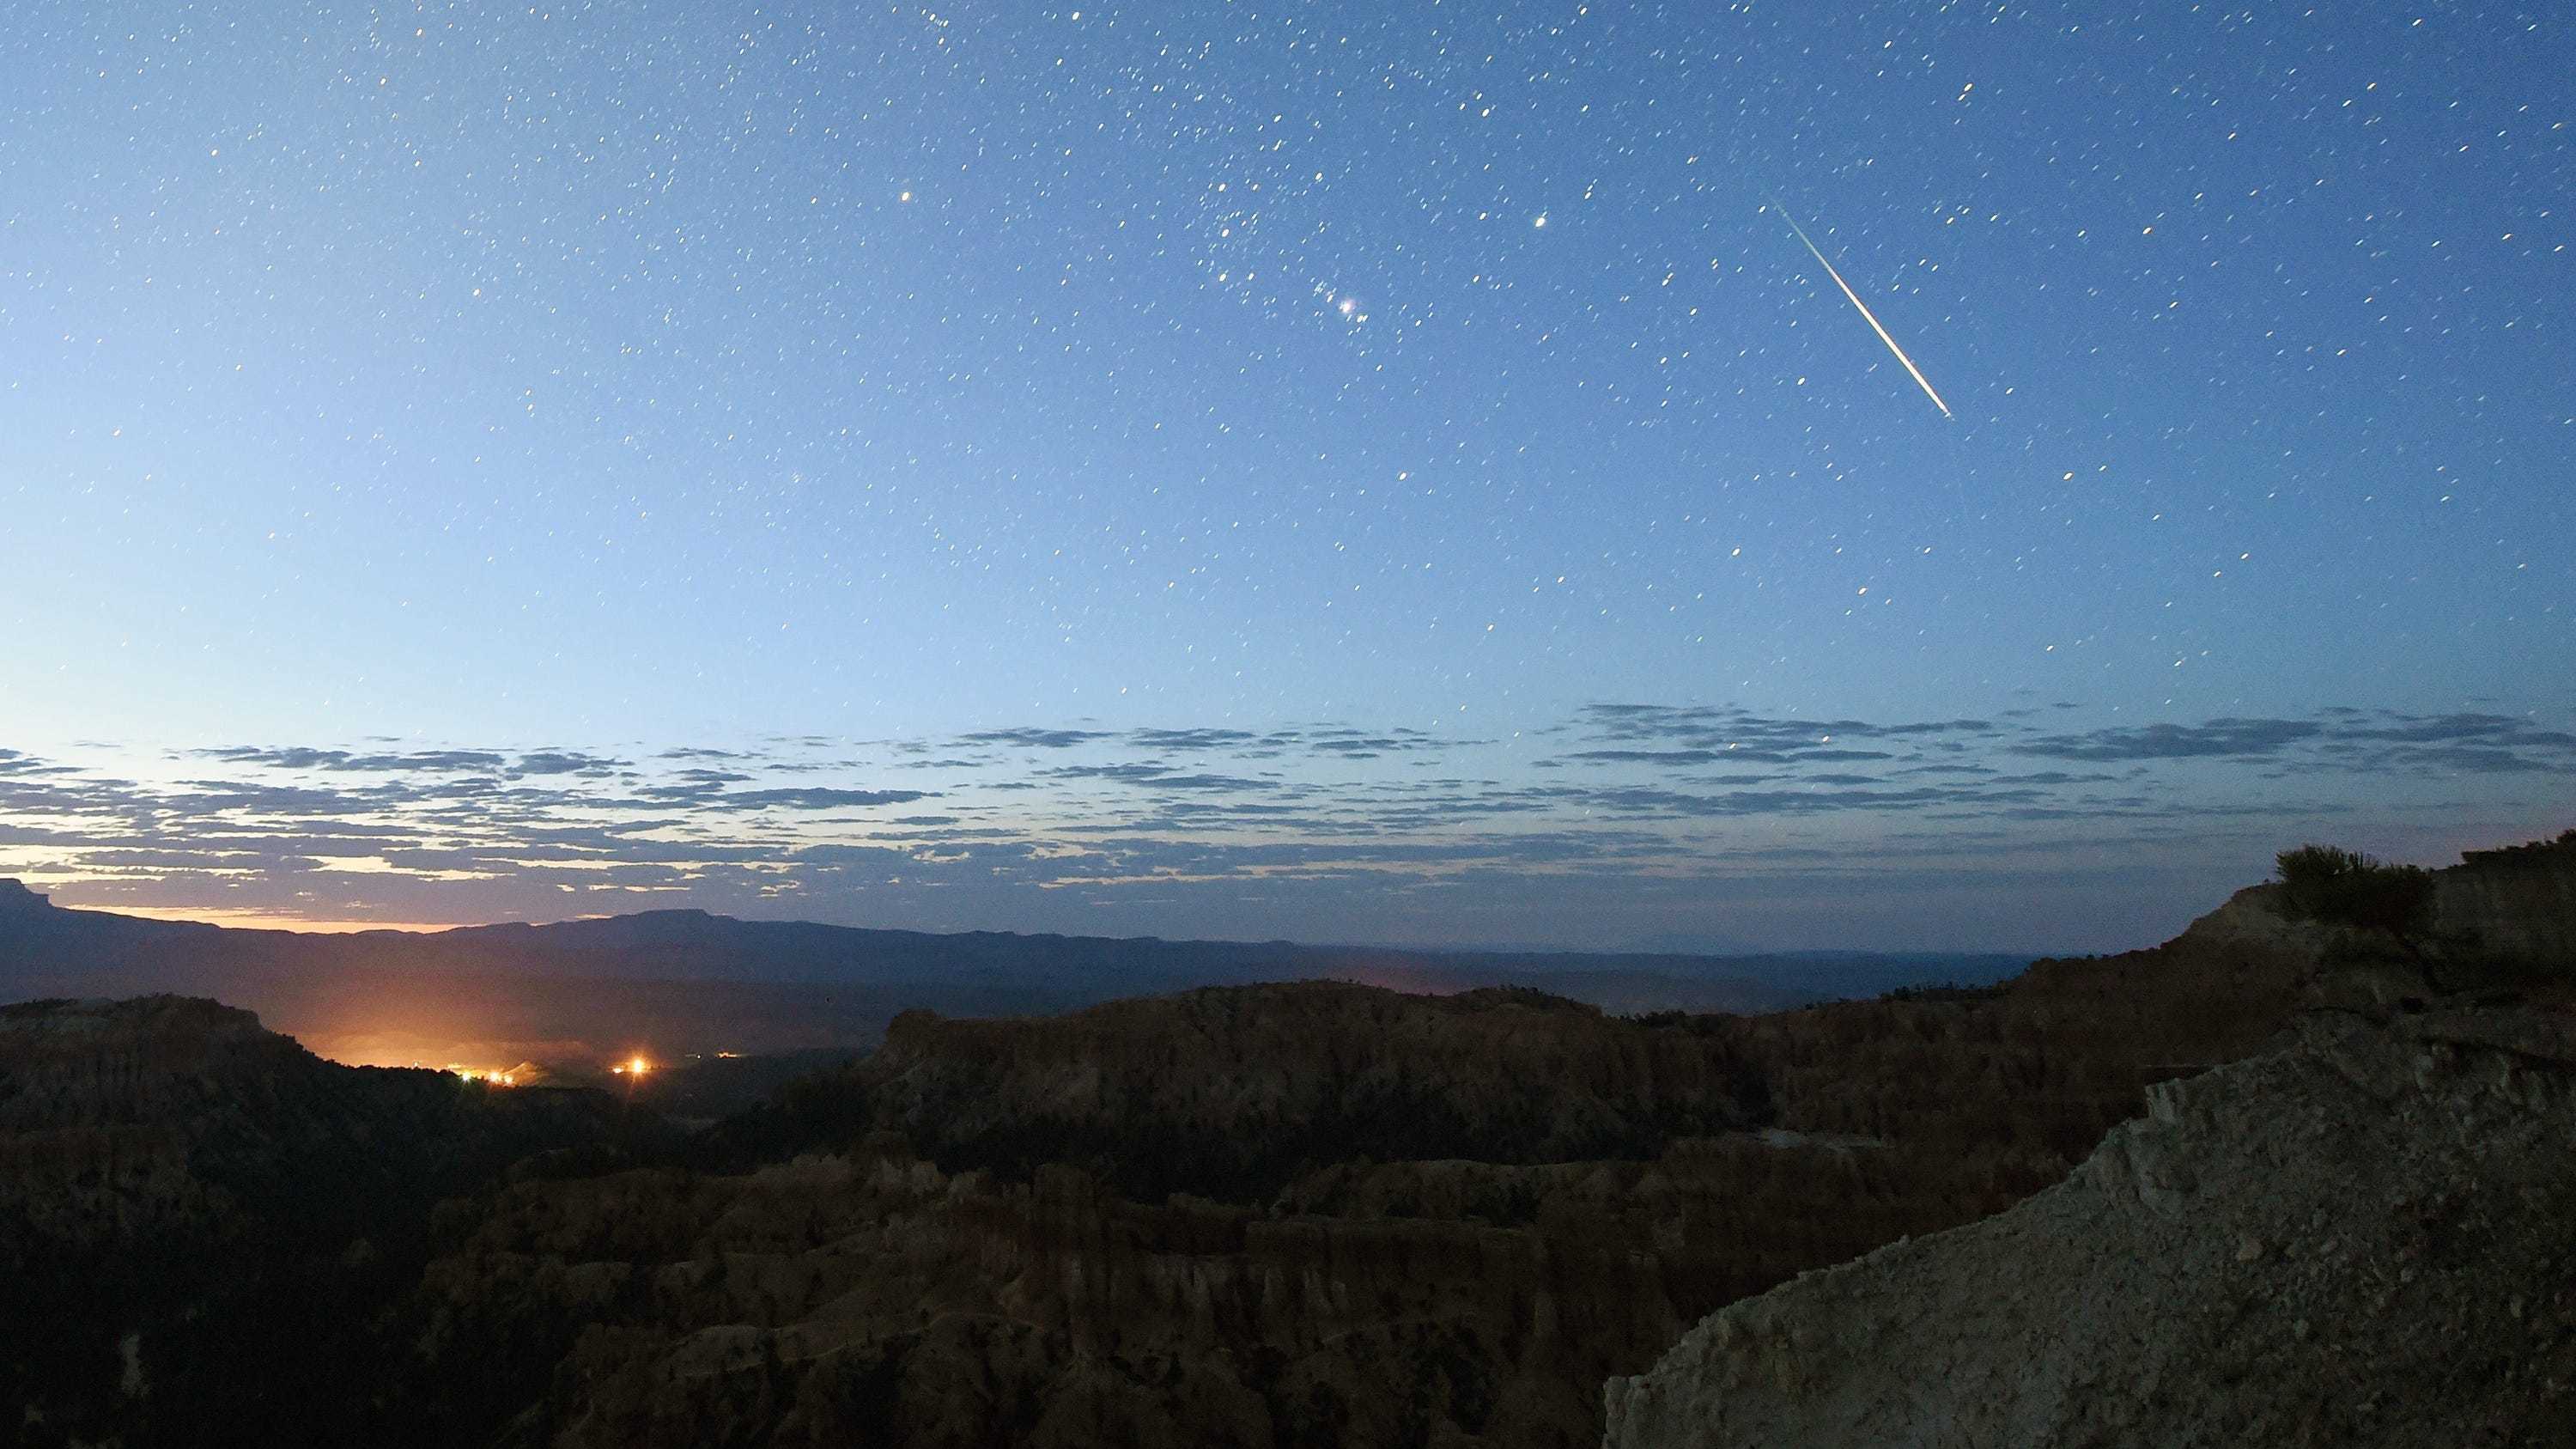 A meteor streaking across a small section of blue sky with stars and the tip of the sun in the lower-left corner visible.